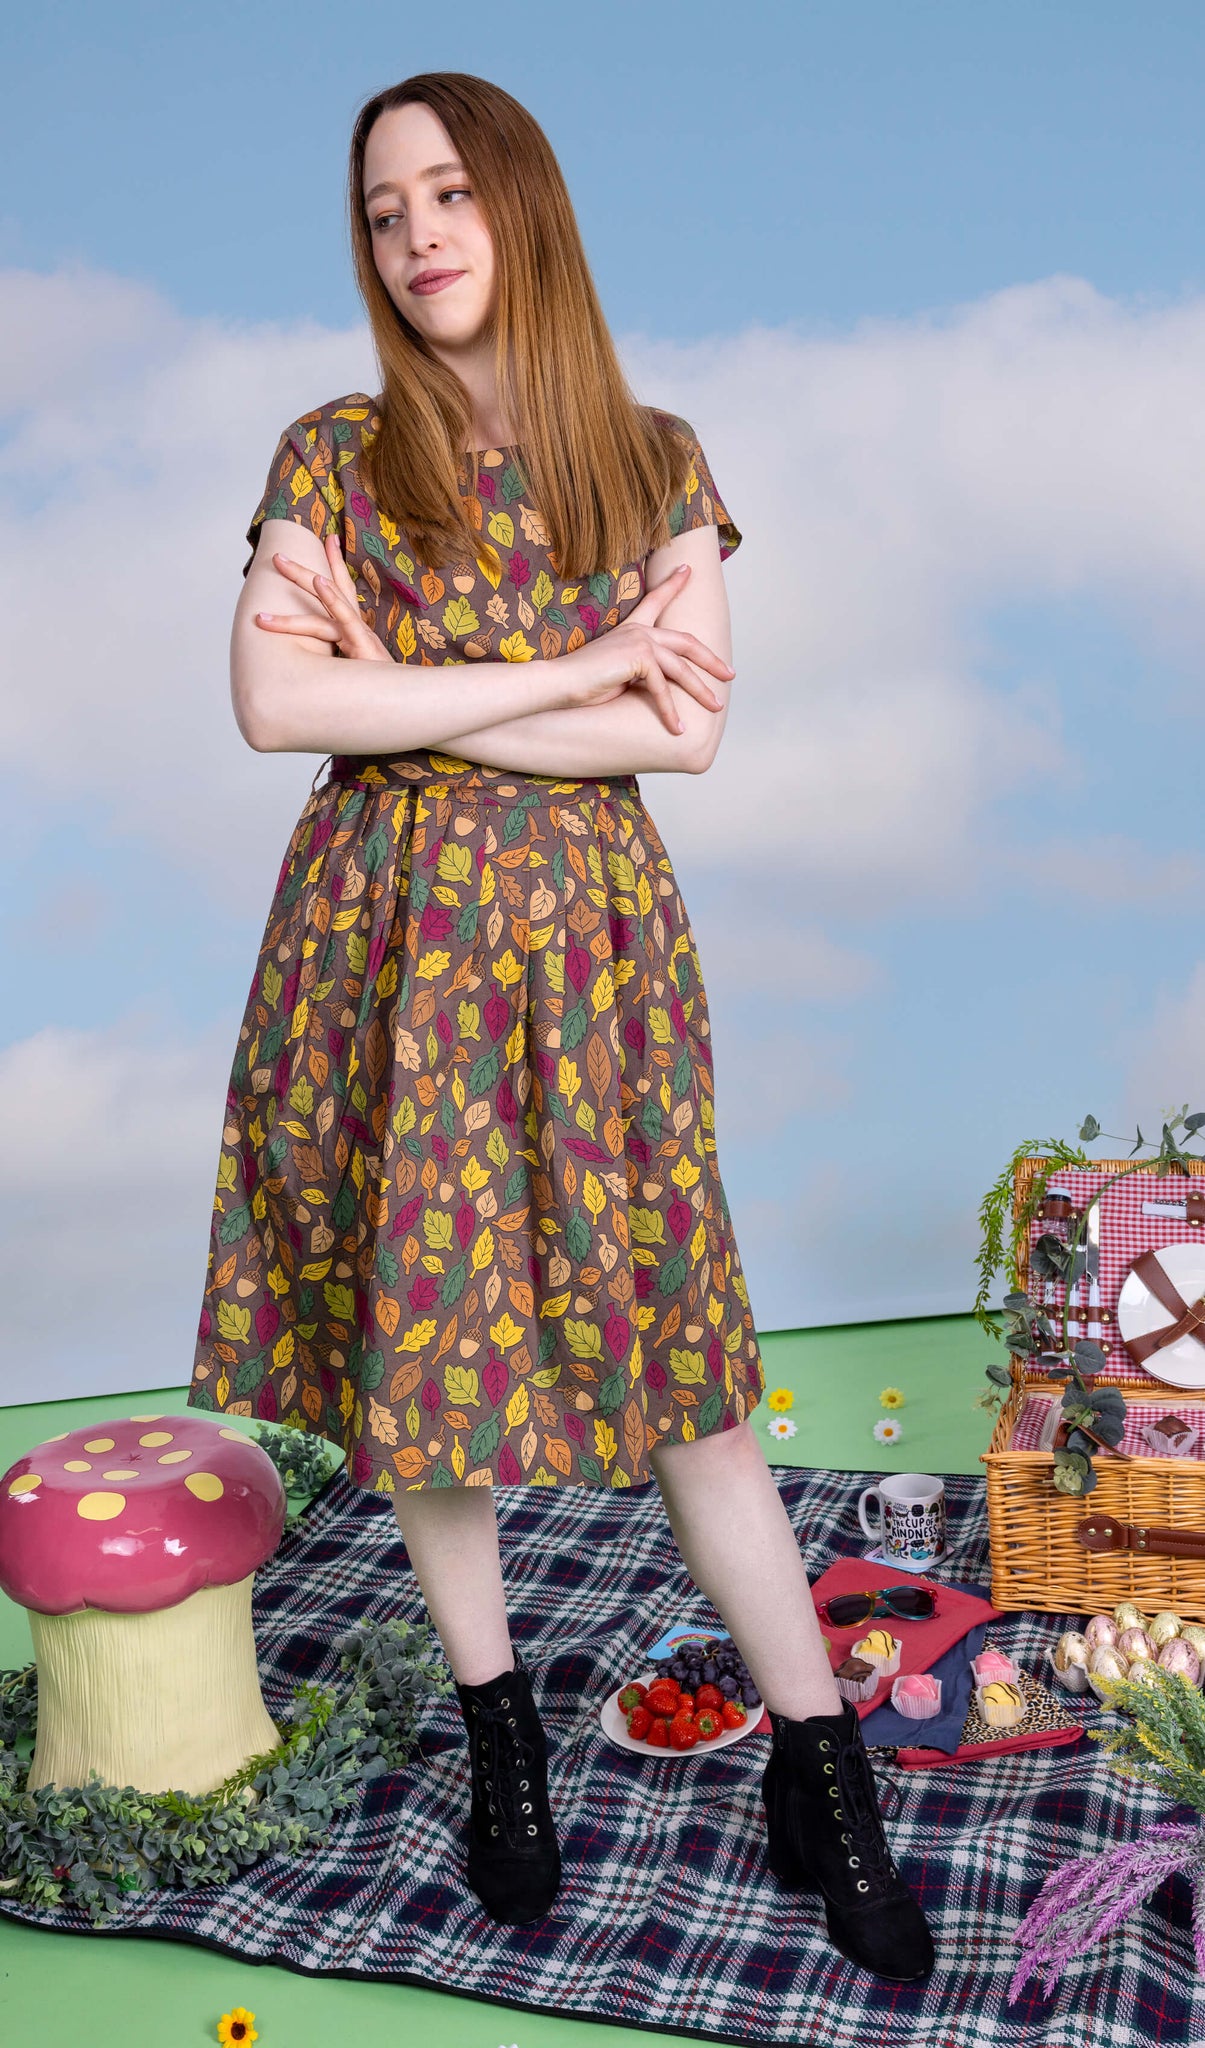 The Autumn Leaves Stretch Belted Tea Dress with Pockets on a femme model with long brown hair and black heeled boots. She is posing leaning back on one leg with her arms crossed smiling to the left at a picnic setup with a picnic basket, fruit, flowers and katie abey mugs. The dress print is a brown base with green, red, orange and yellow autumnal leaves and acorns.